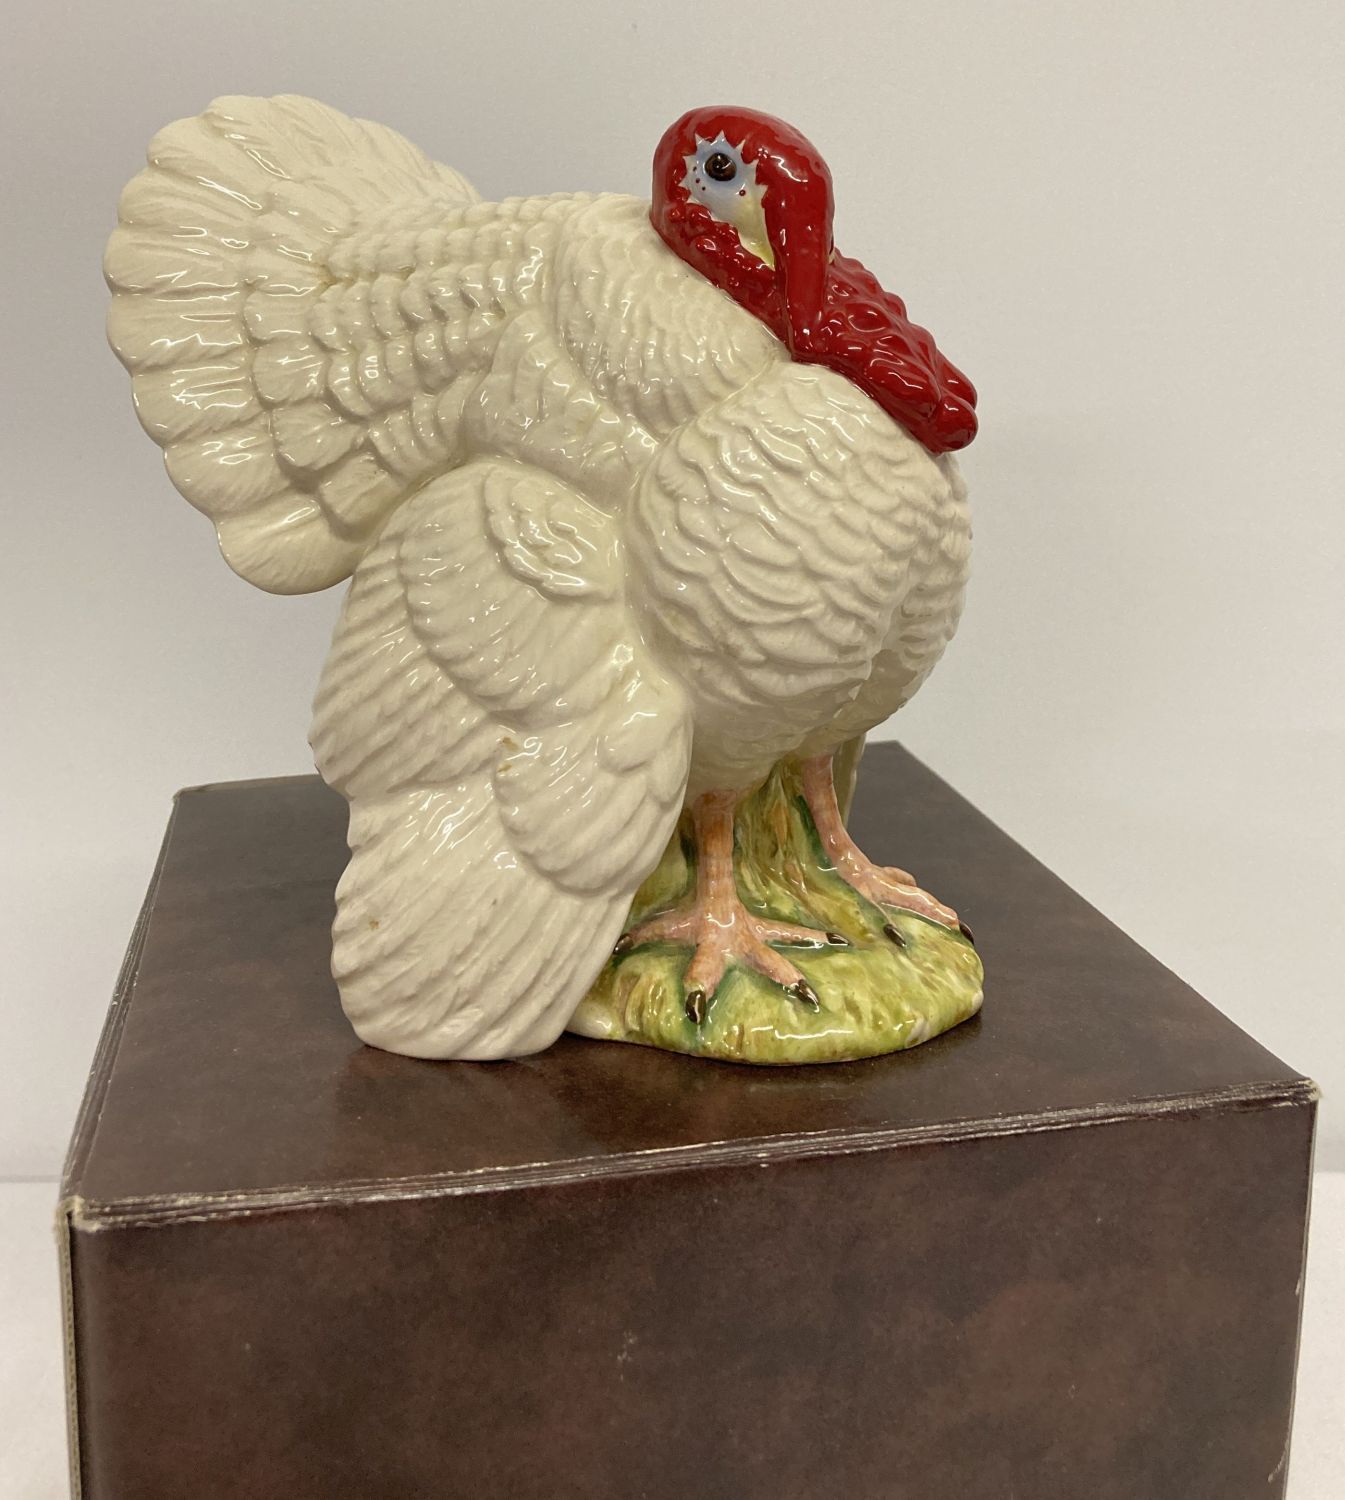 Limited Edition Royal Doulton "The Turkey" D6889, 1990 (chip to back of tail).